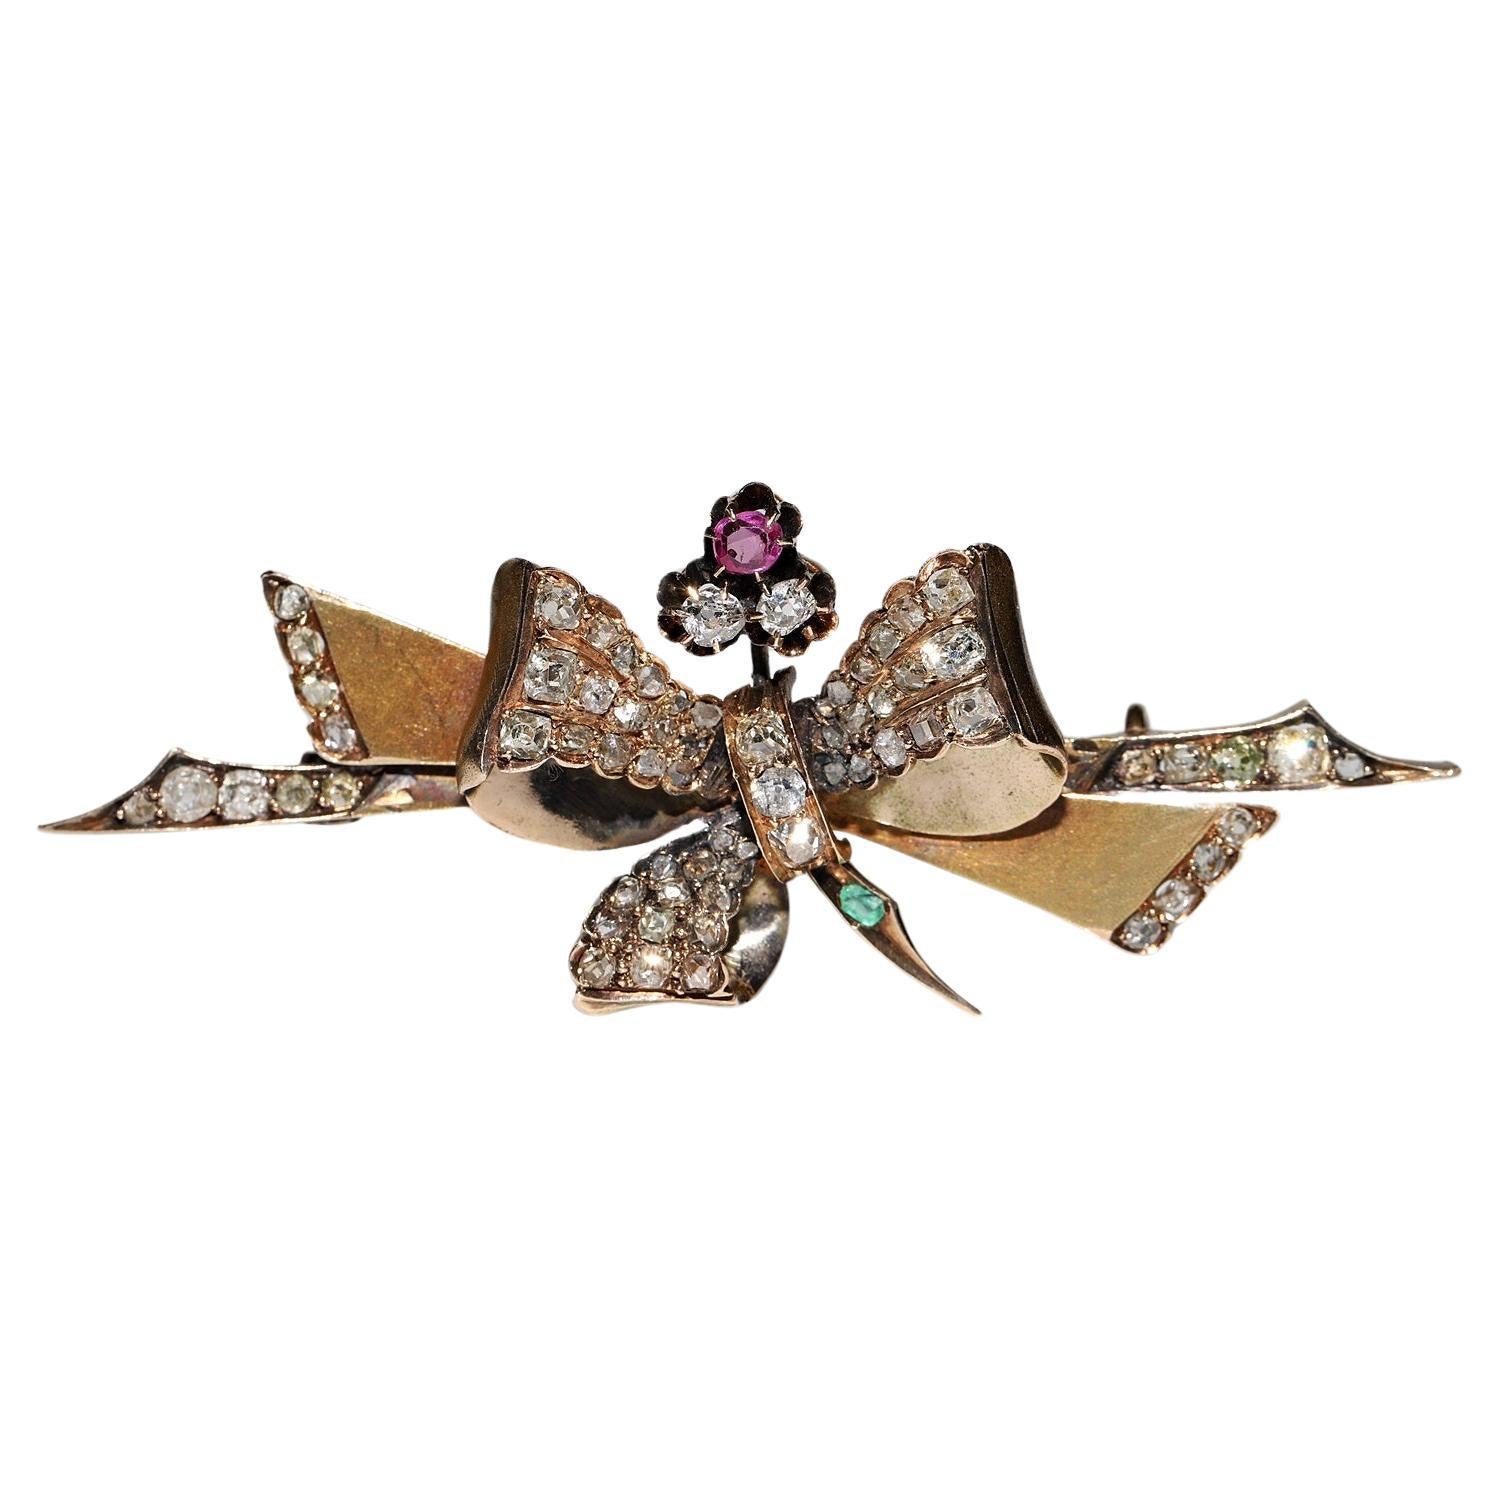 Antique Original Circa 1900s 14k Gold Natural Old Cut Diamond Decorated Brooch For Sale